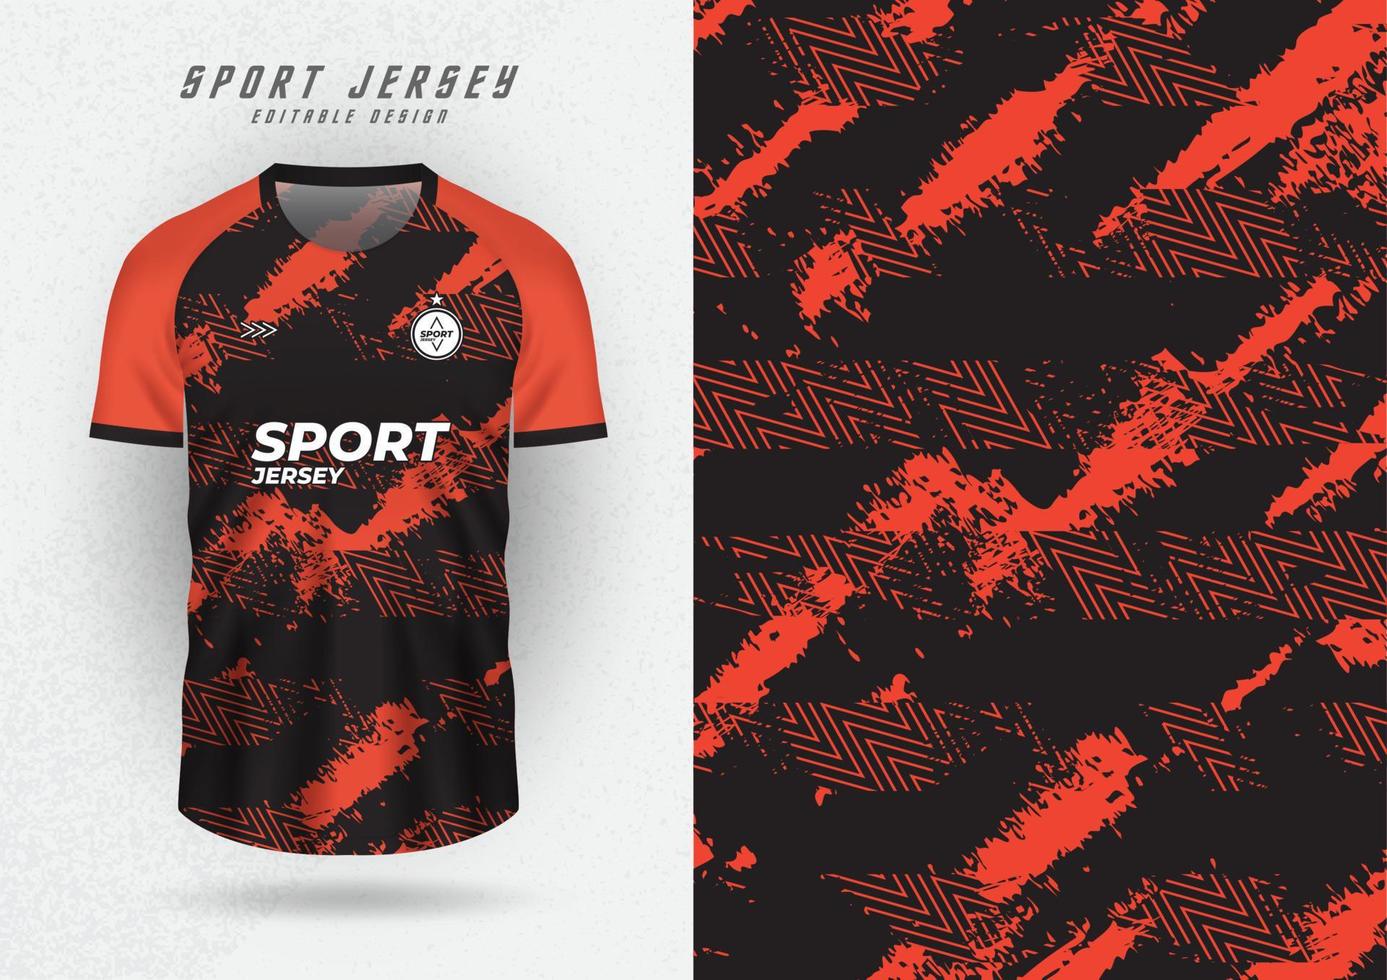 background for sports jersey soccer jersey running jersey racing jersey brush pattern black and orange vector